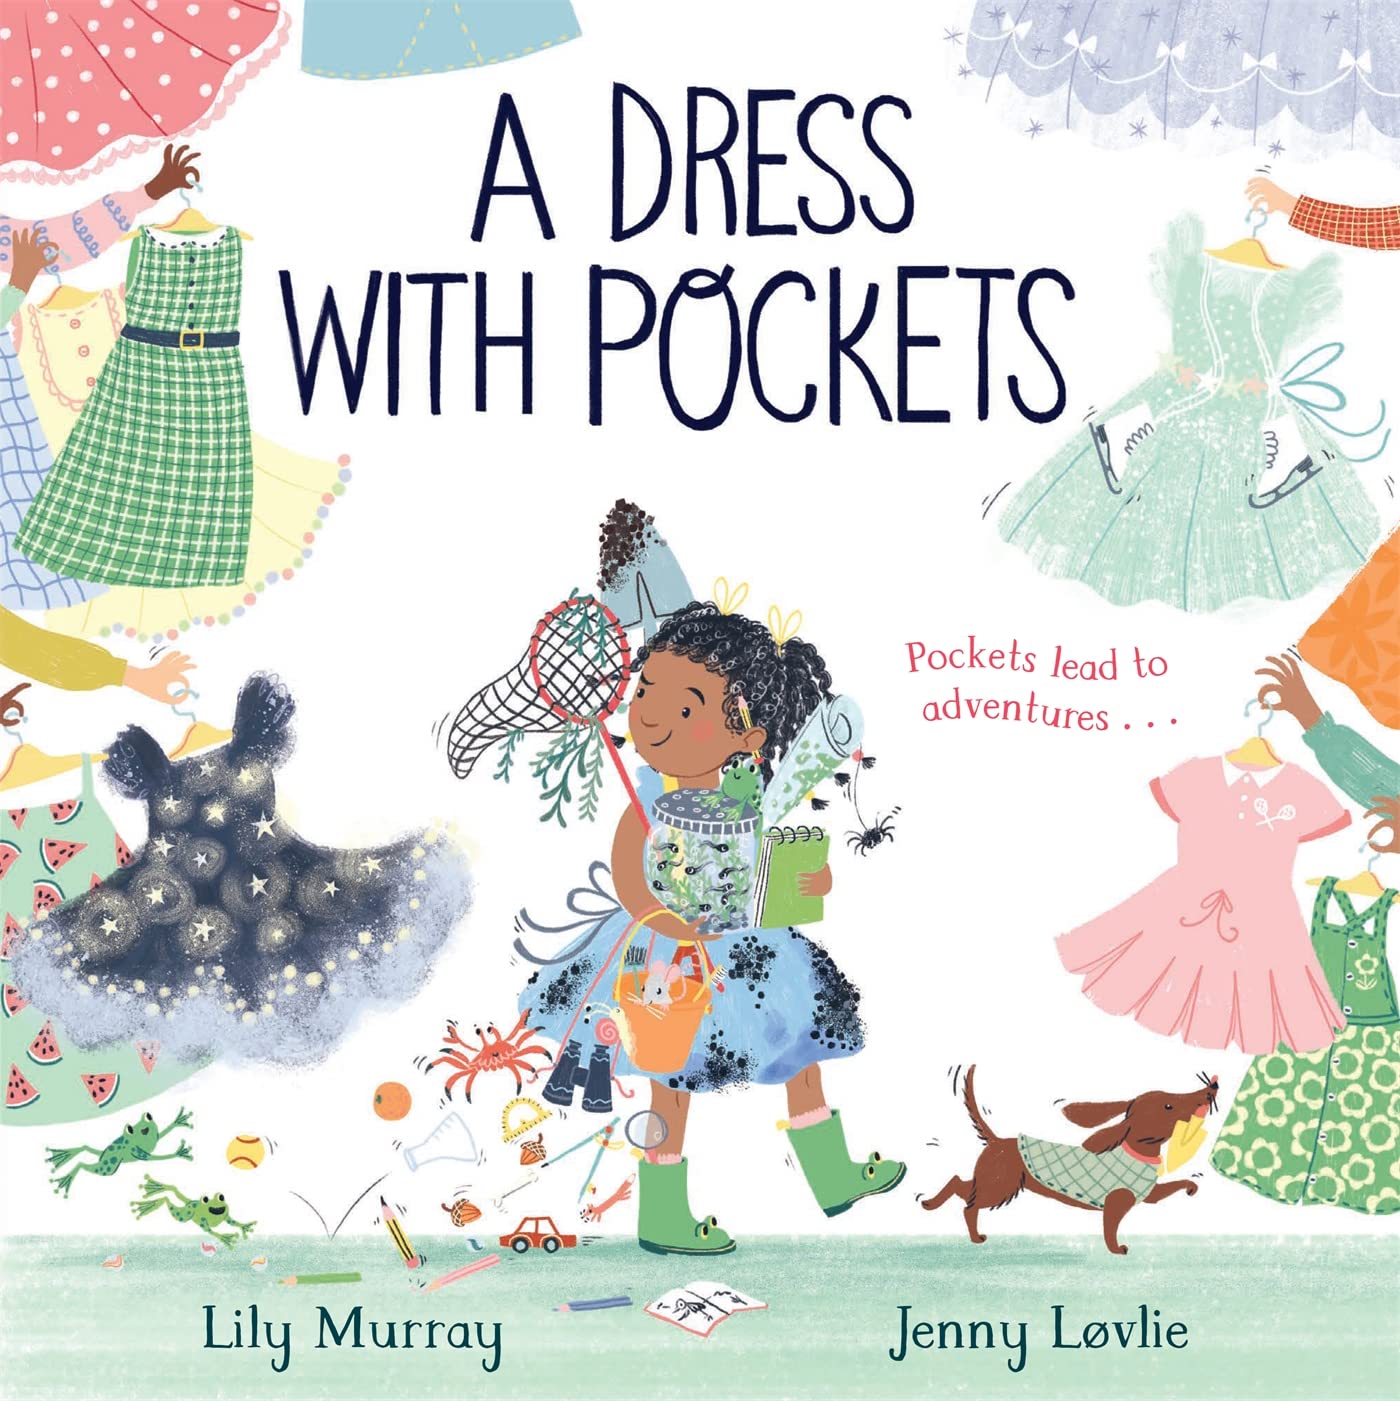 A book cover, titled a dress with pockets